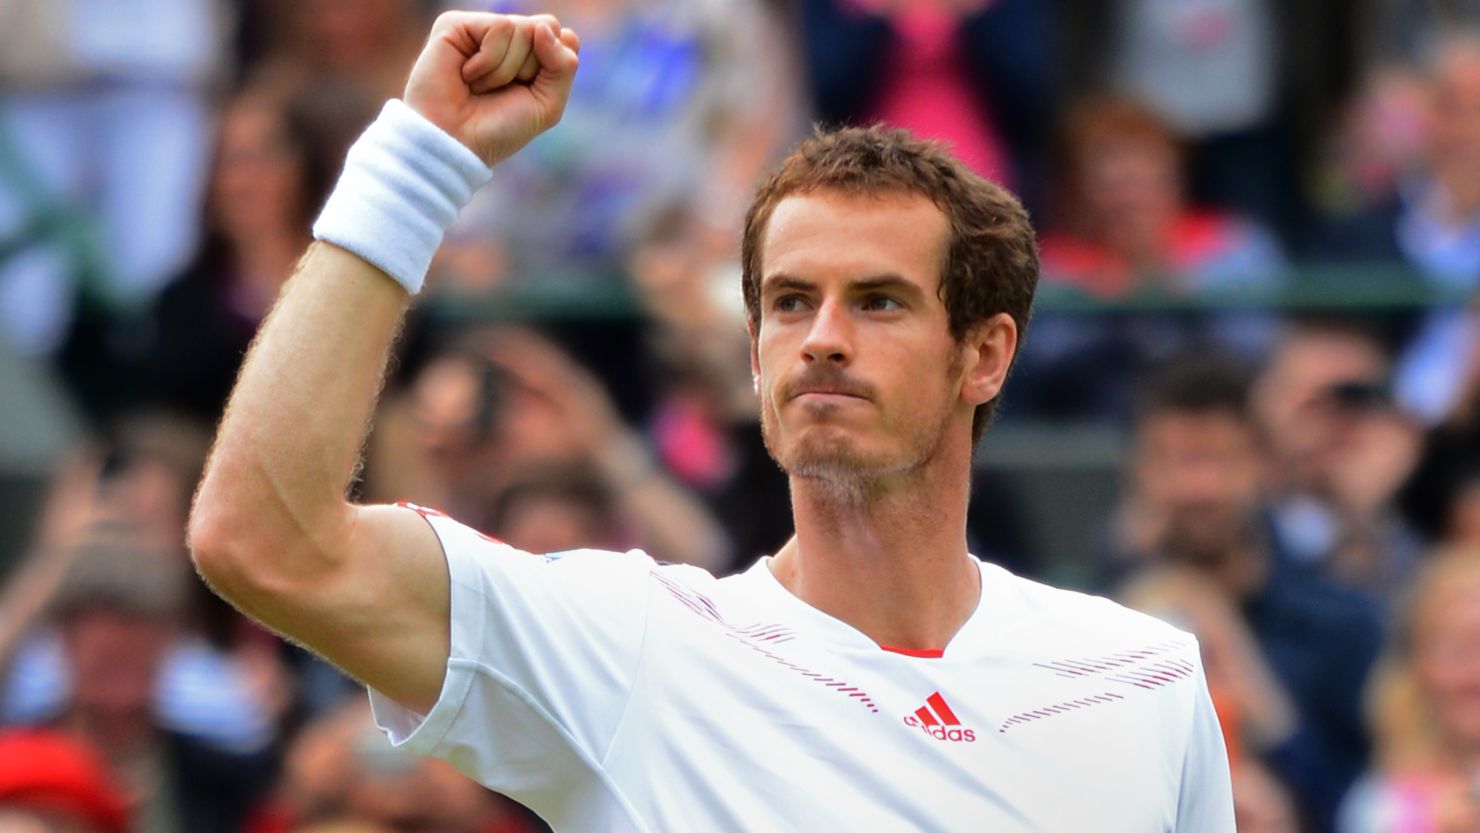 Britain's Andy Murray toasts the win over Marin Cilic that sealed his place in the last eight at Wimbledon